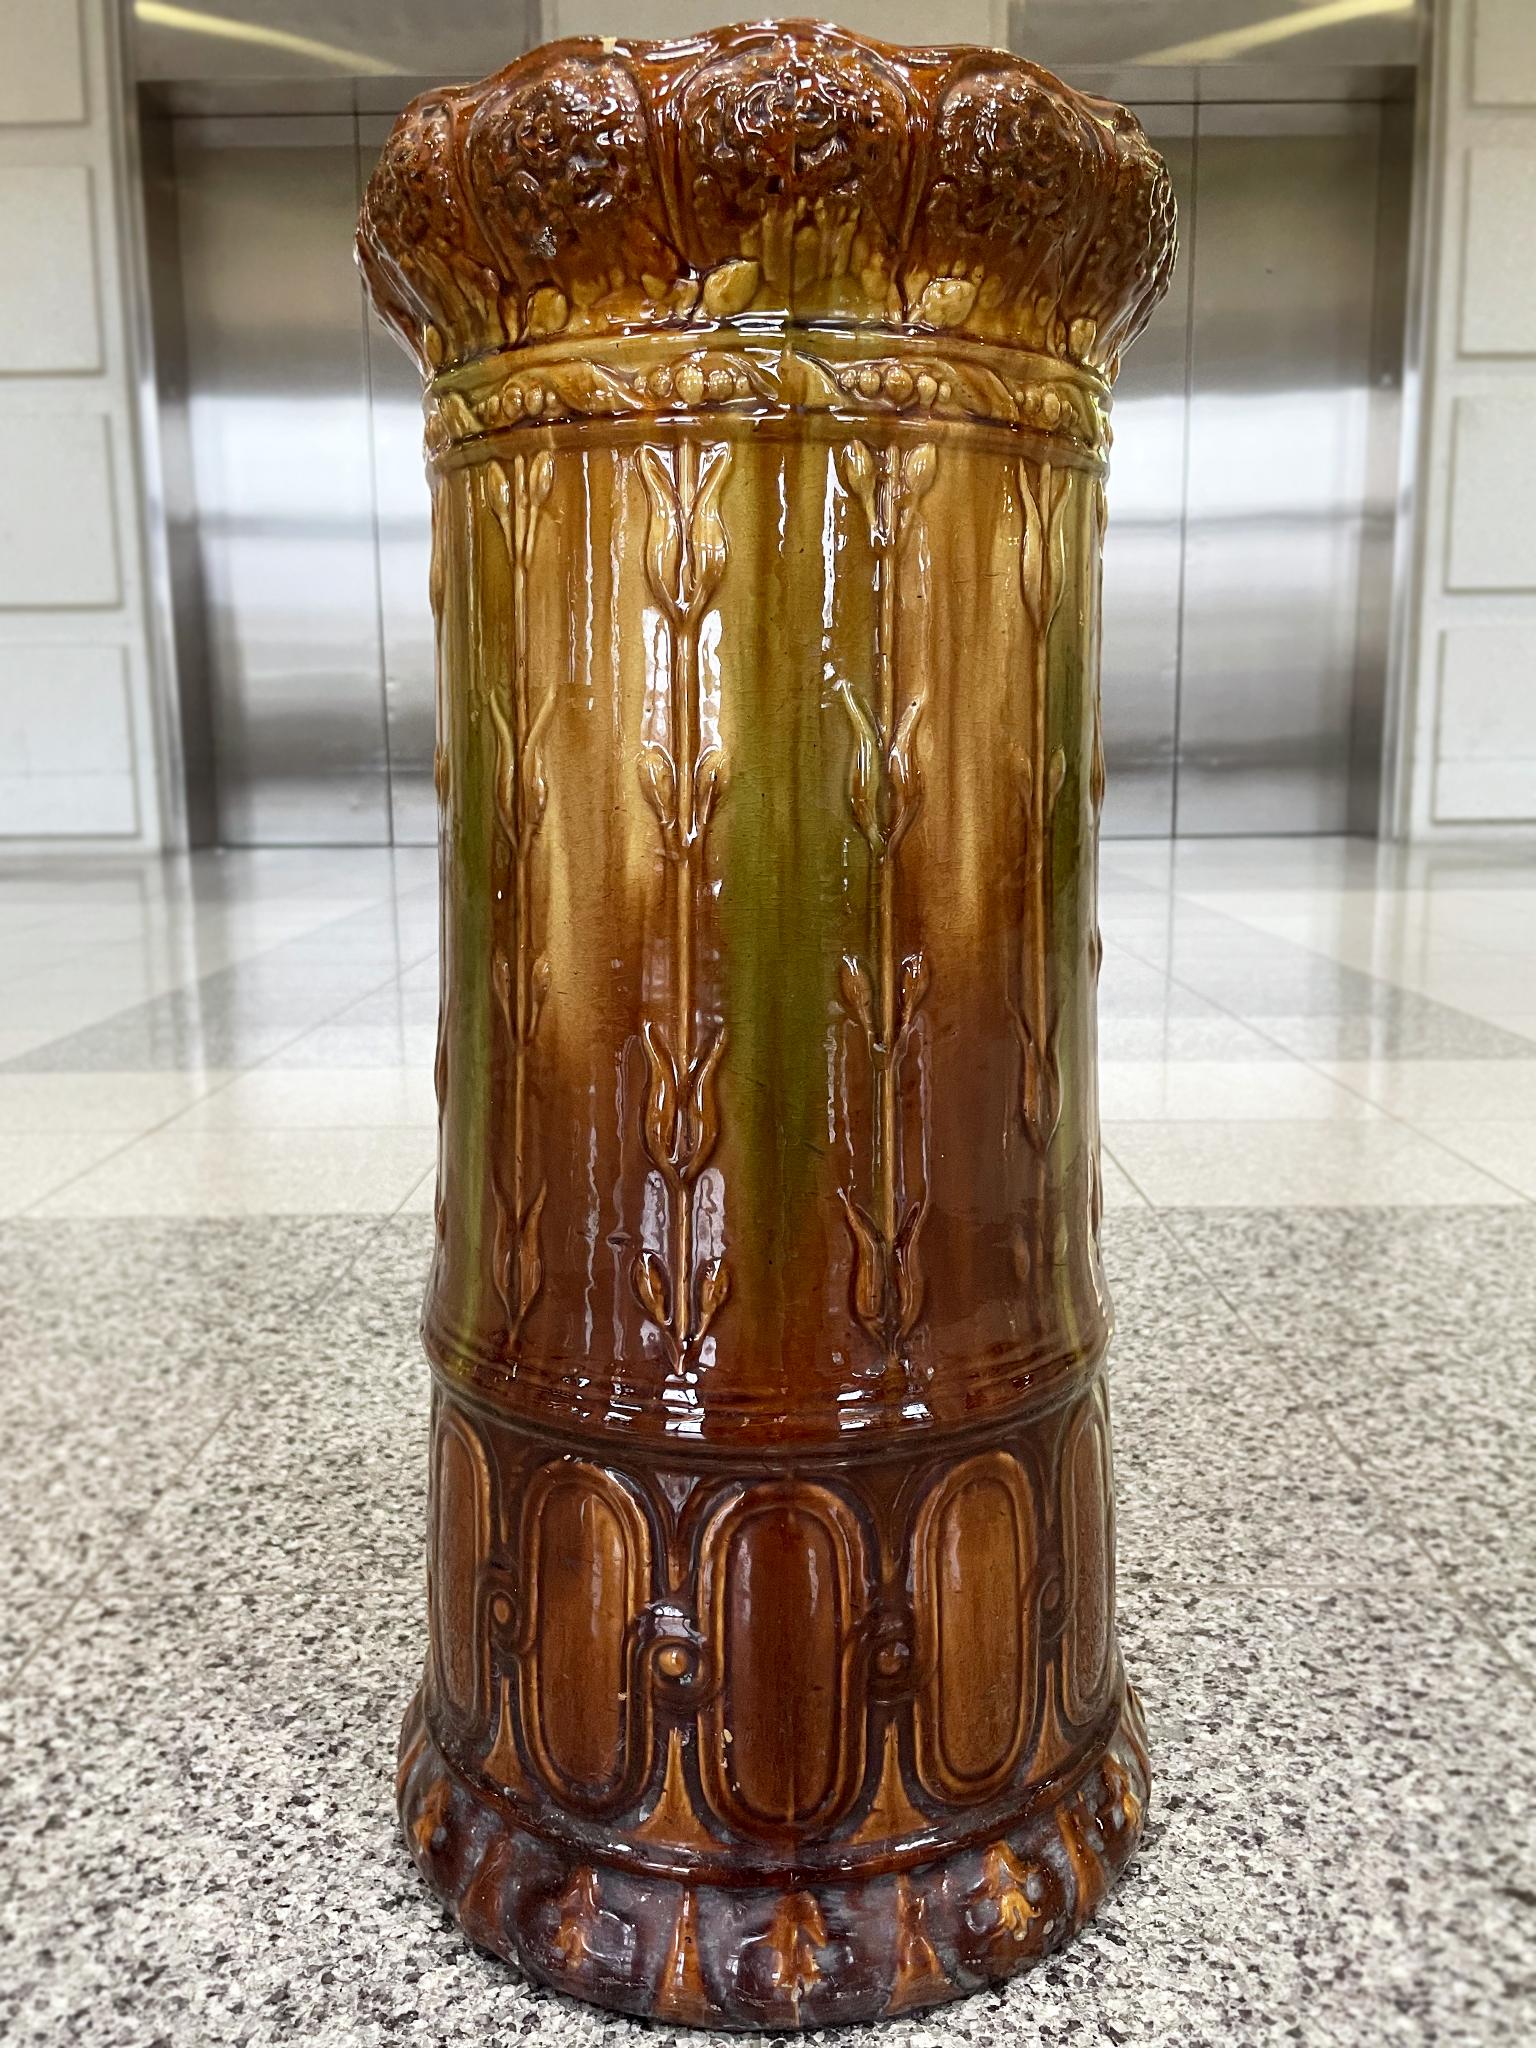 Antique Pottery Umbrella Stand - 9 For Sale on 1stDibs